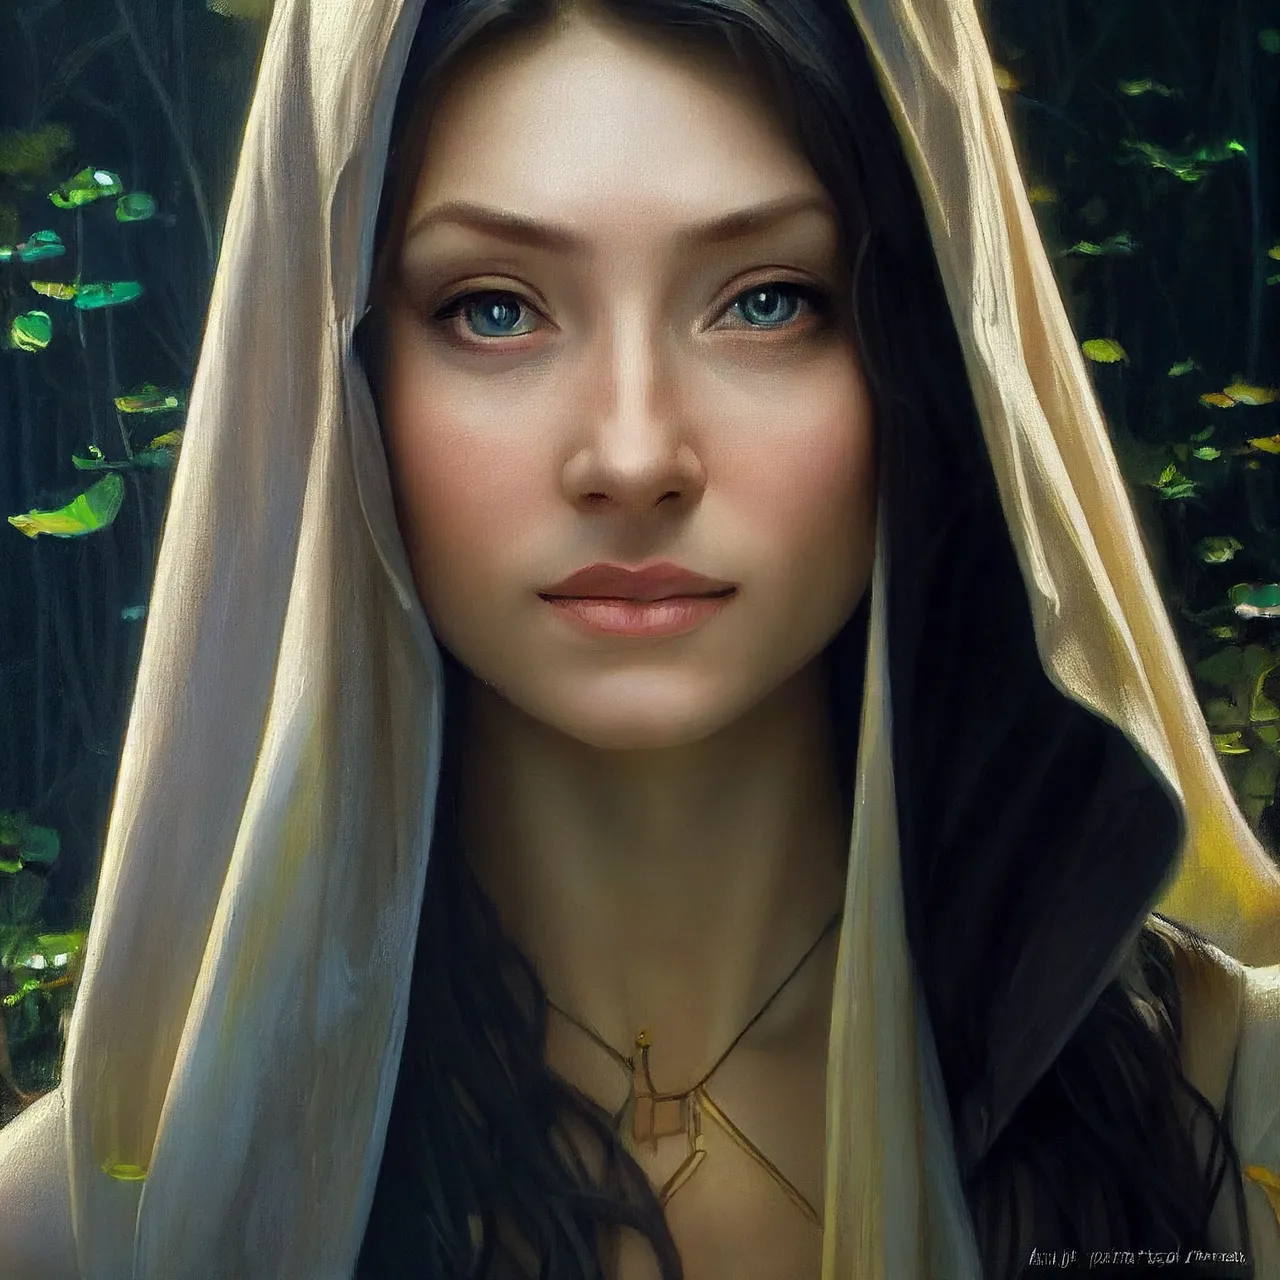 Ed_Privat_photorealistic_oil_painting_of_Galadriel_full_body_dr_fde3ebaf-9a3f-44d5-9e3f-ce399c29d80b.png